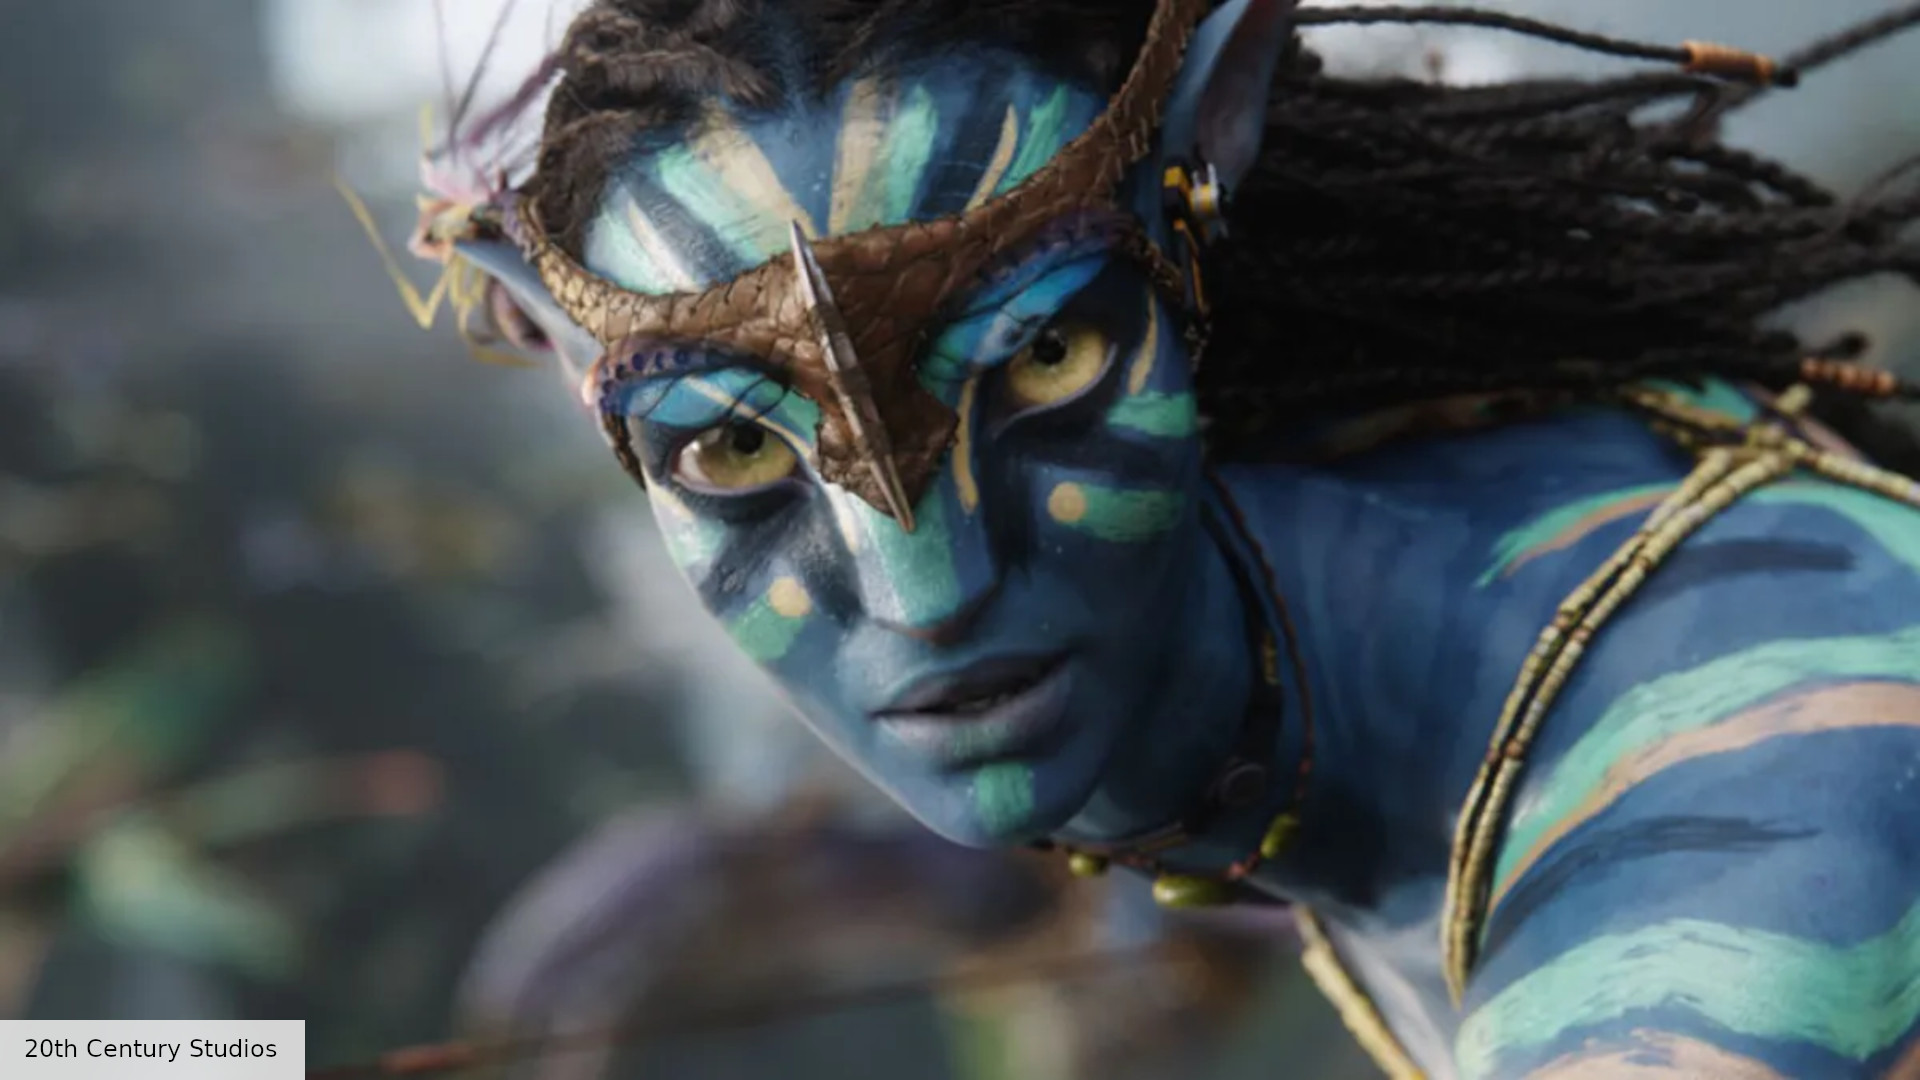 Avatar 2 release date, cast, plot, trailers, and more | The Digital Fix